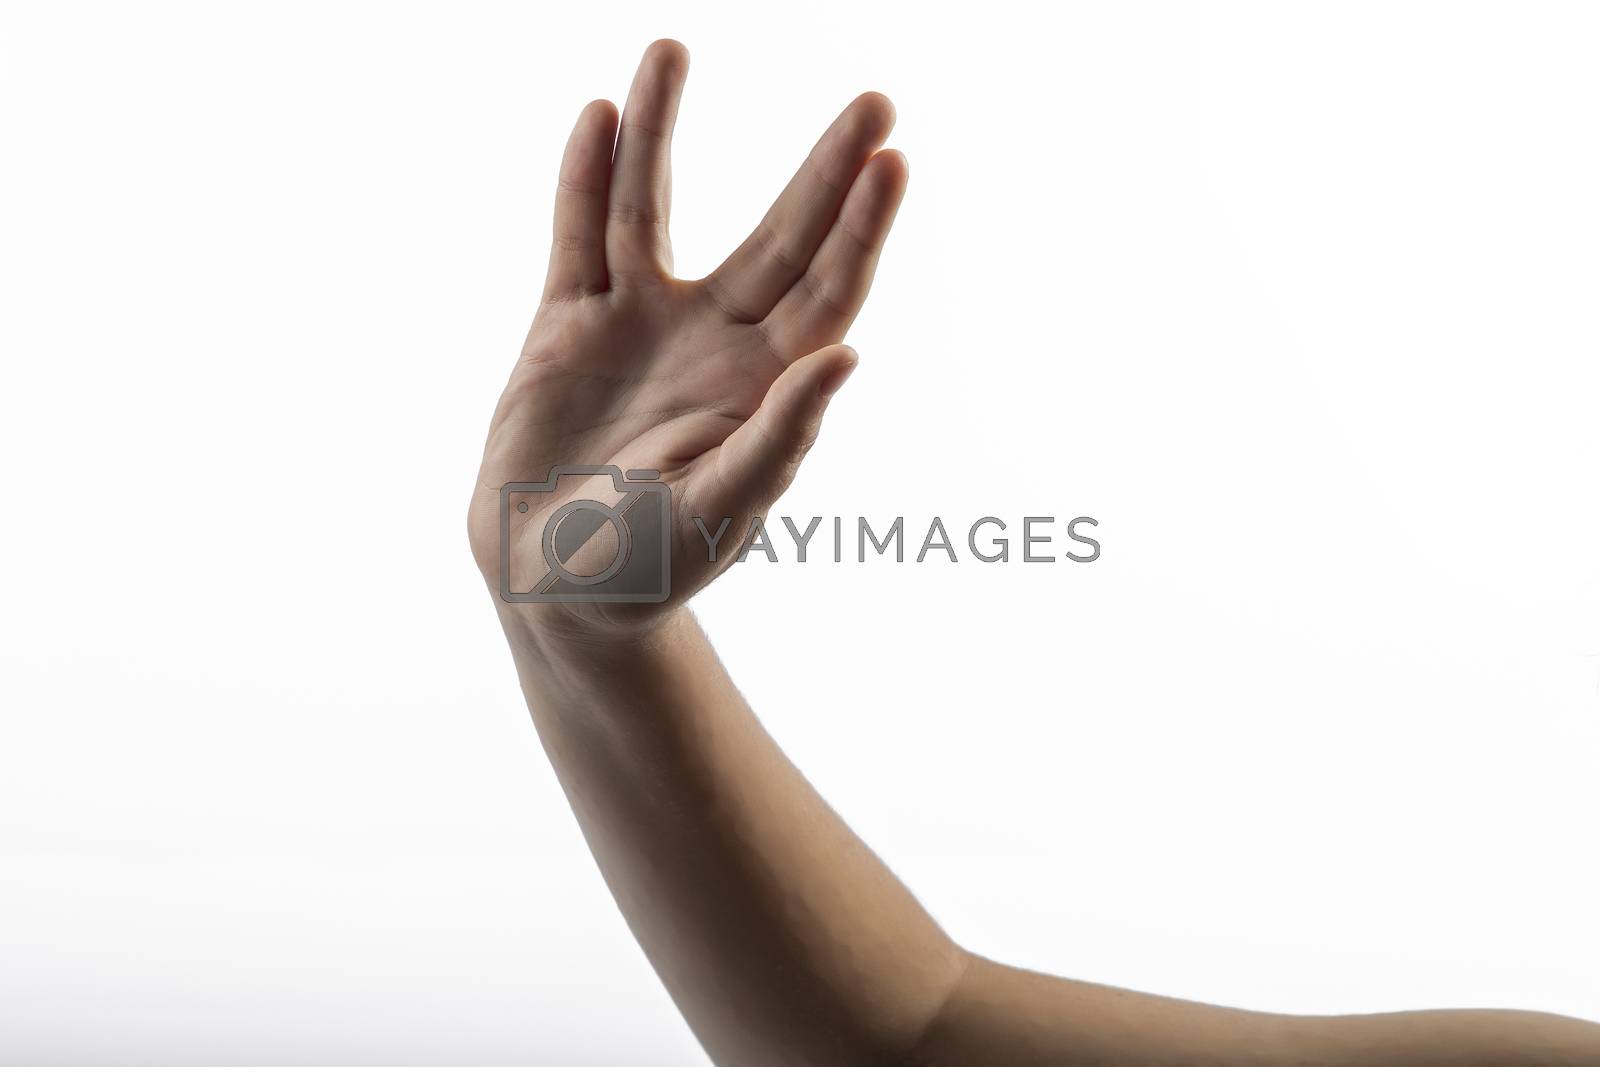 Royalty free image of Young hands make Vulcan Salute by paocasa